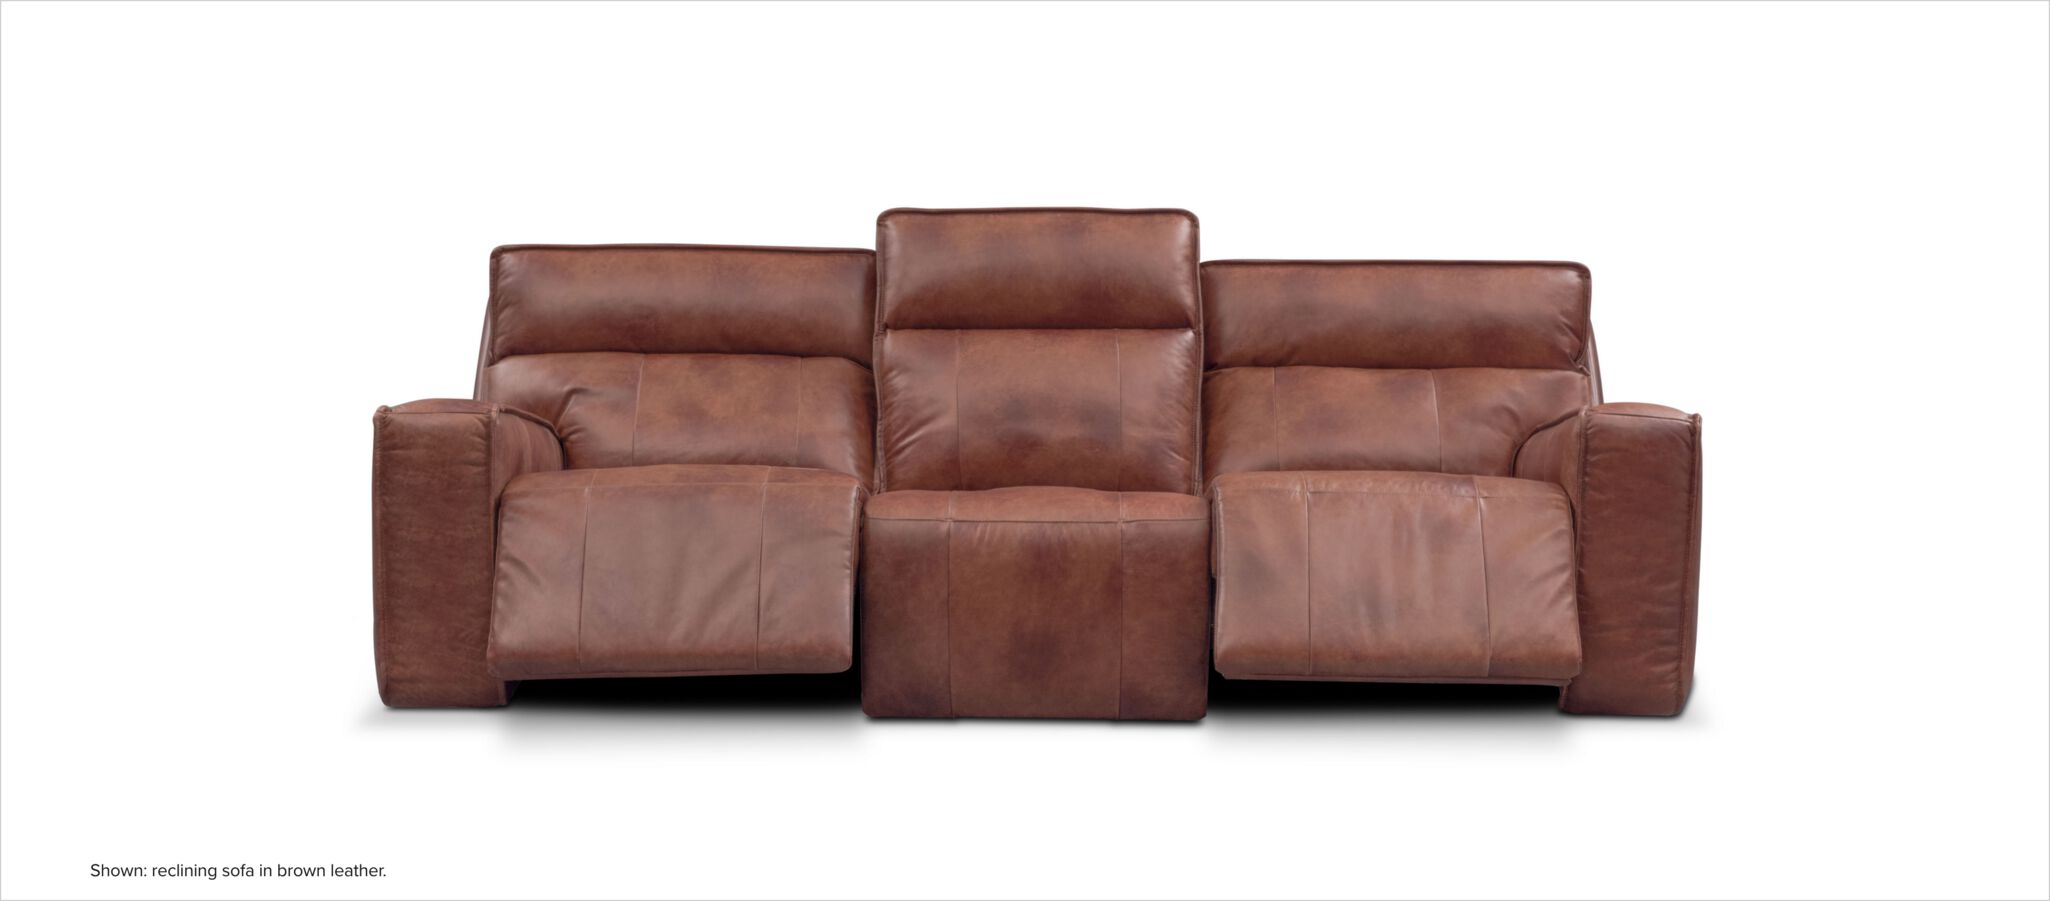 Bradley reclining sofa in brown leather. 